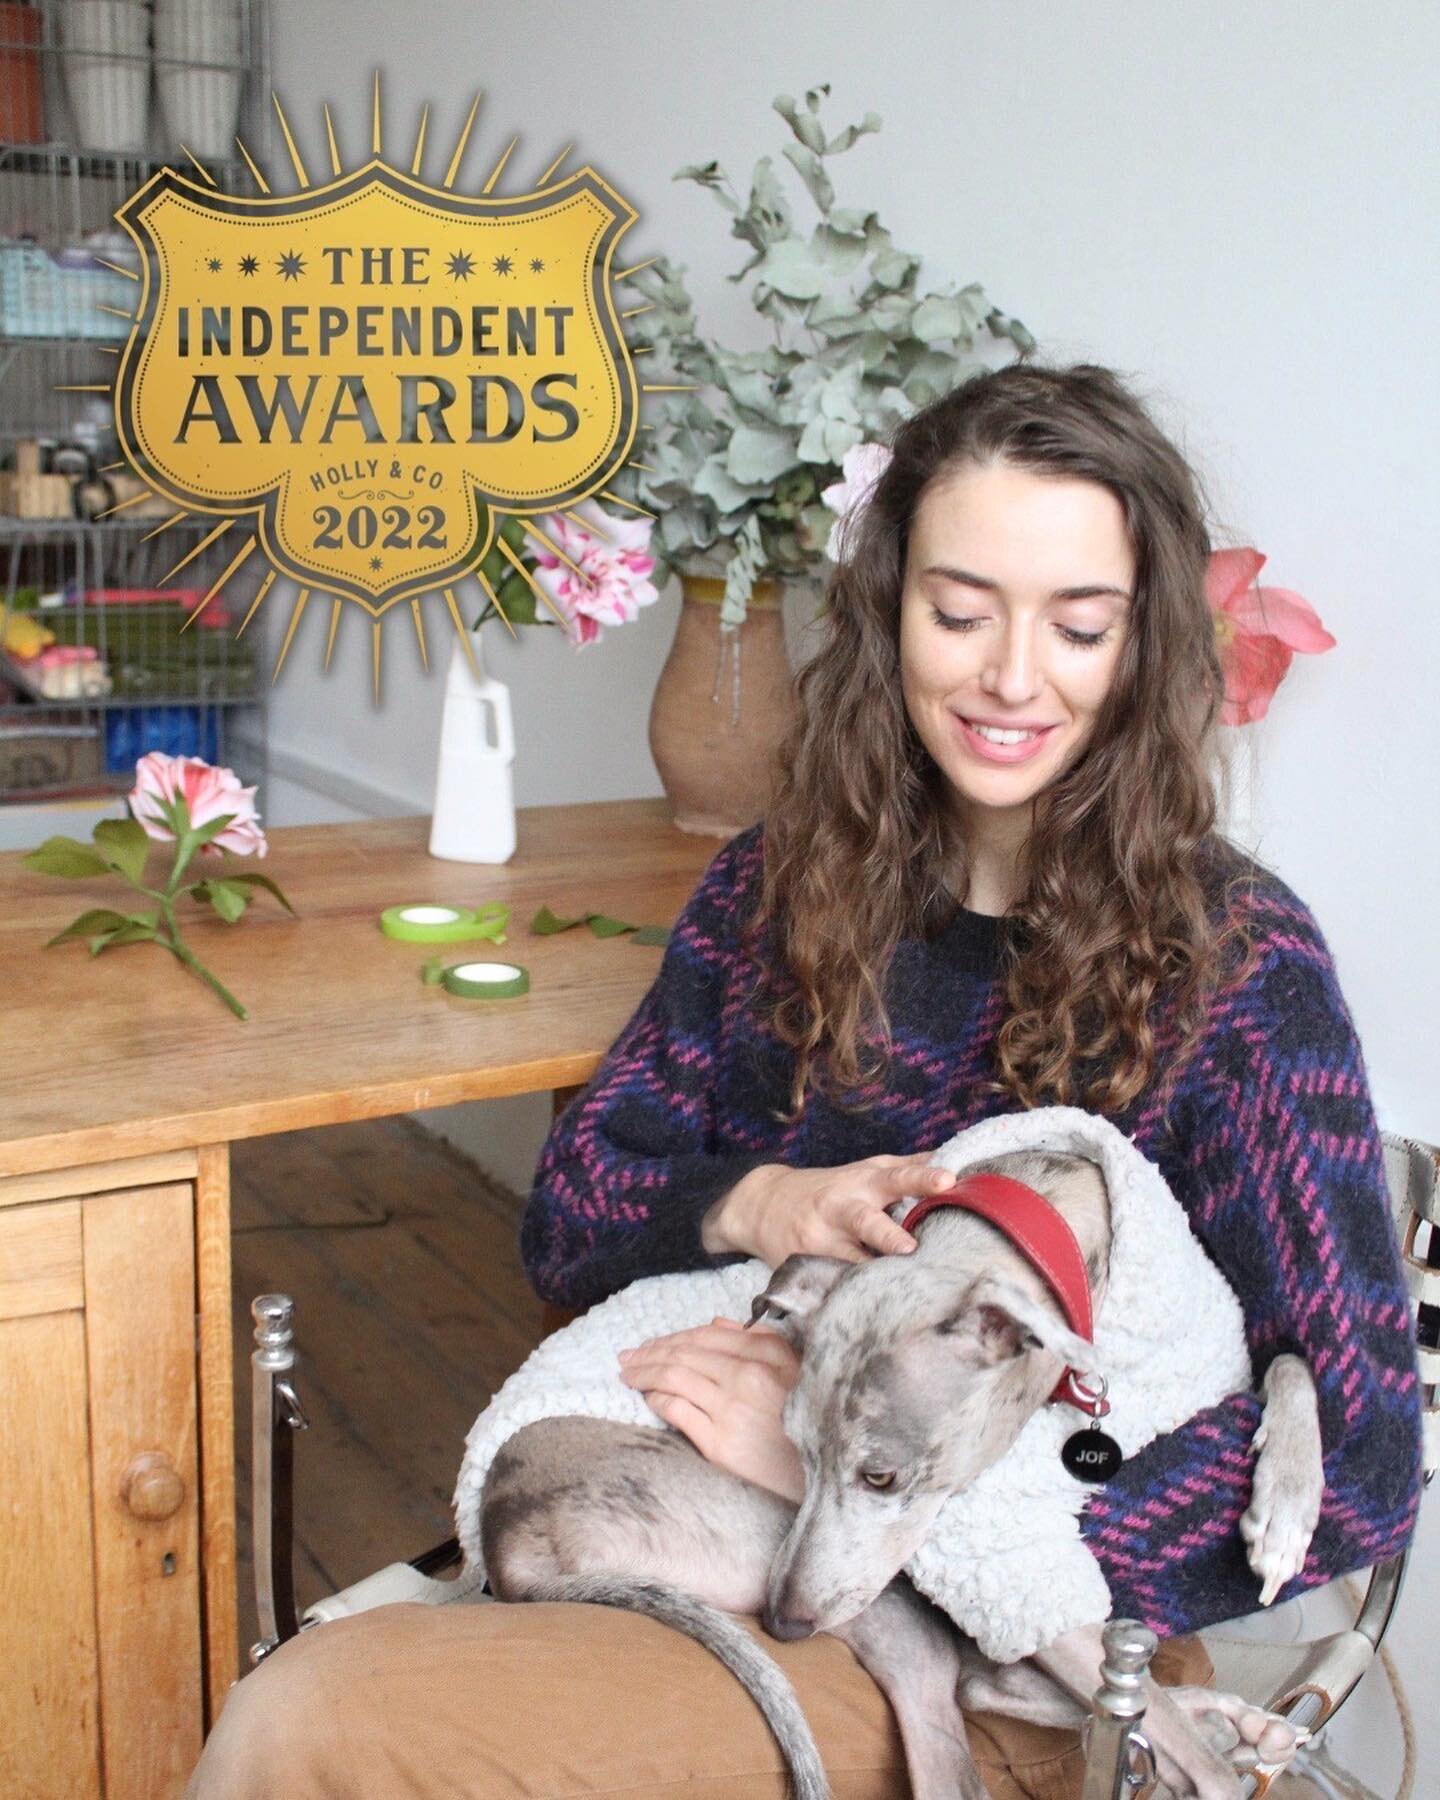 I've been nominated in the Independent Awards - and I'd love your vote!

Being a nominee puts me in the running for winning grant funding for the business, which would be an immeasurably helpful leg-up to working on bigger and brighter things.

Leo F